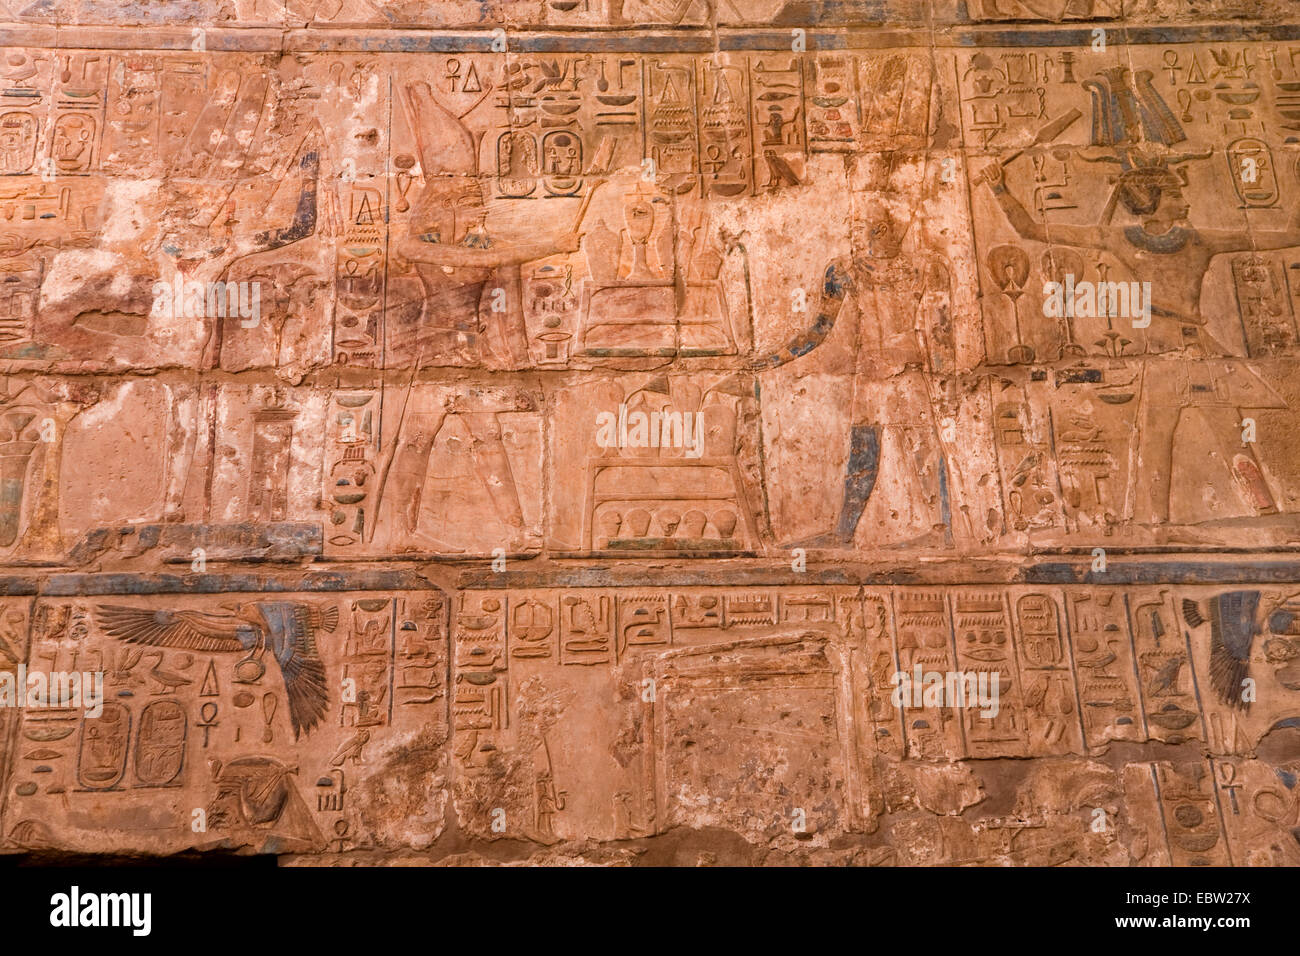 mural relief and remains of paint at the Luxor Temple, Egypt, Luxor Stock Photo